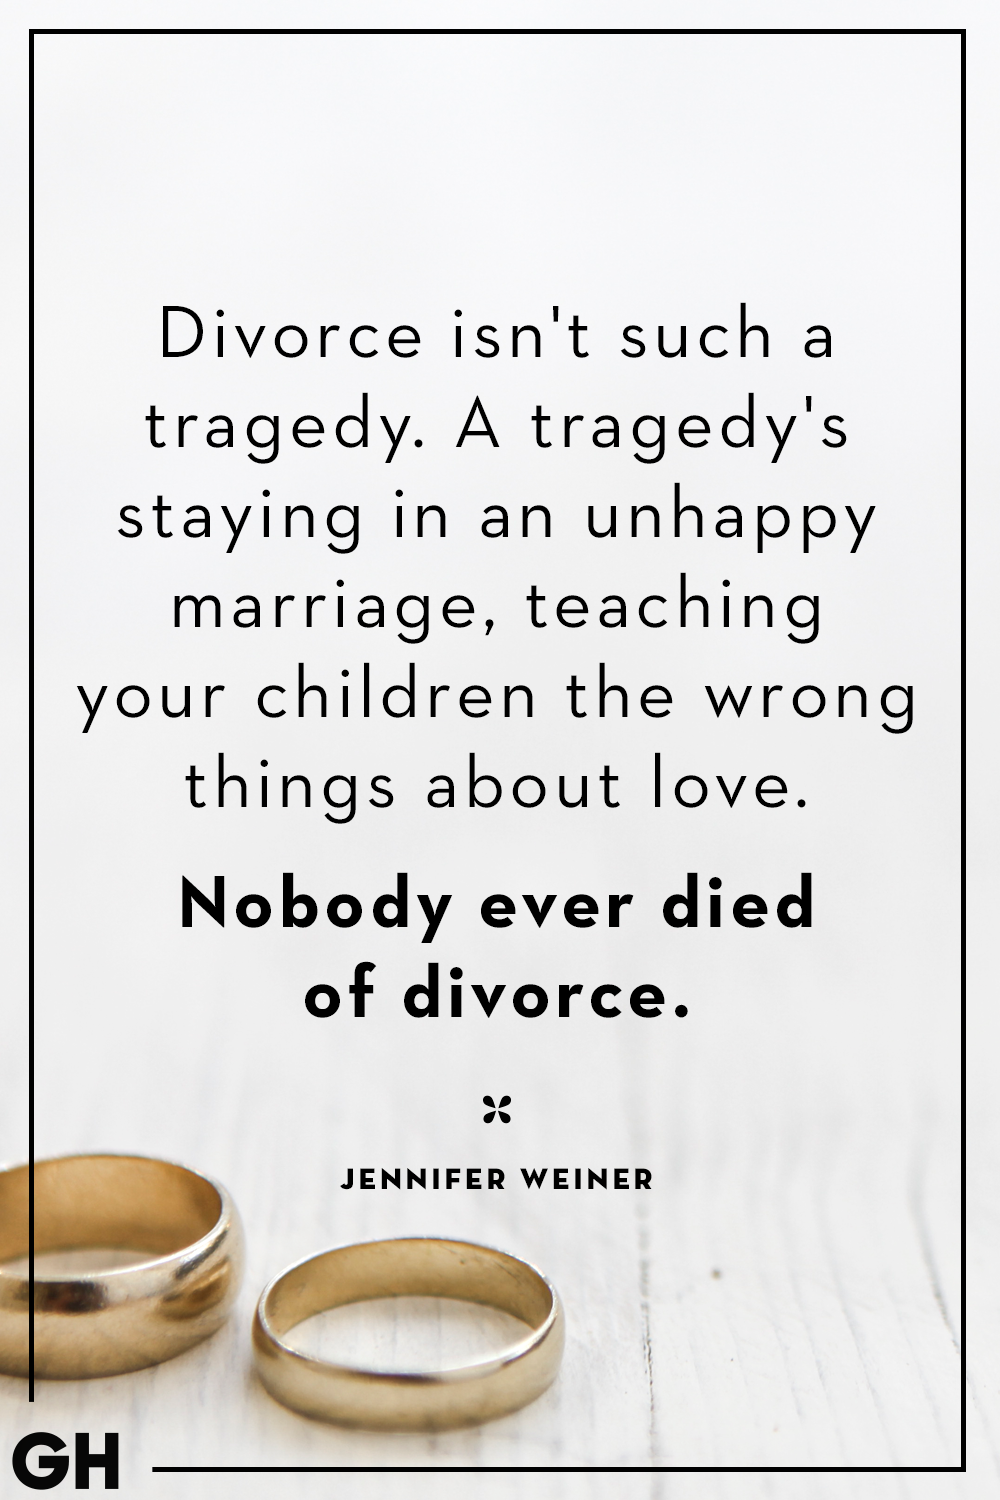 Marriage after divorce quotes